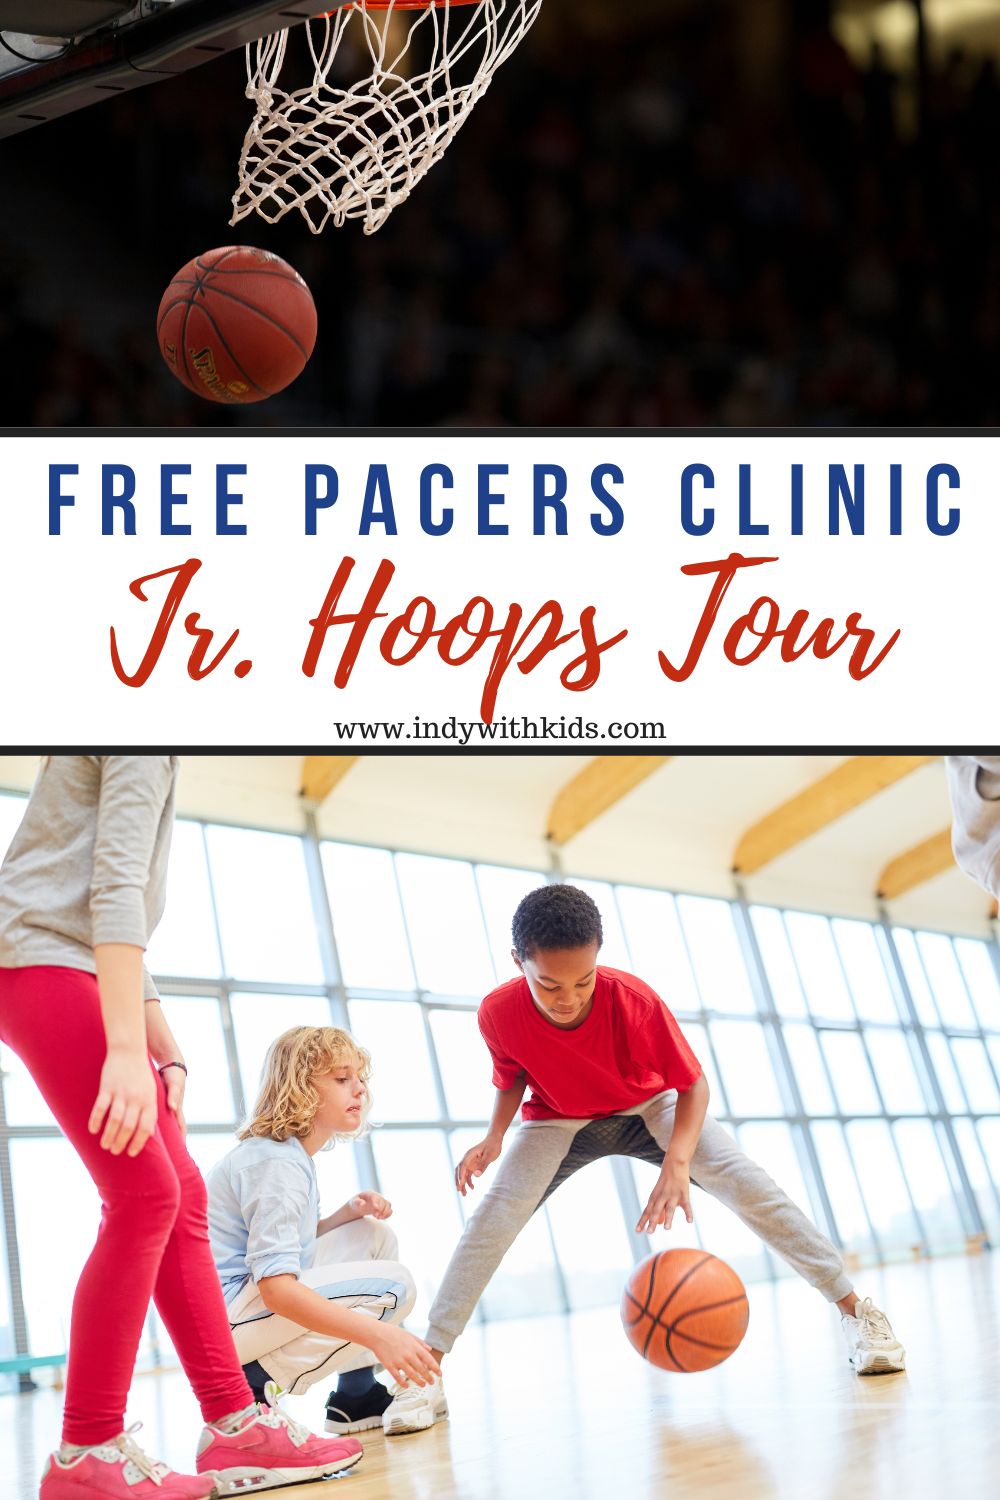 Register for a free Pacers basketball camp through the Jr. Hoops Tour.